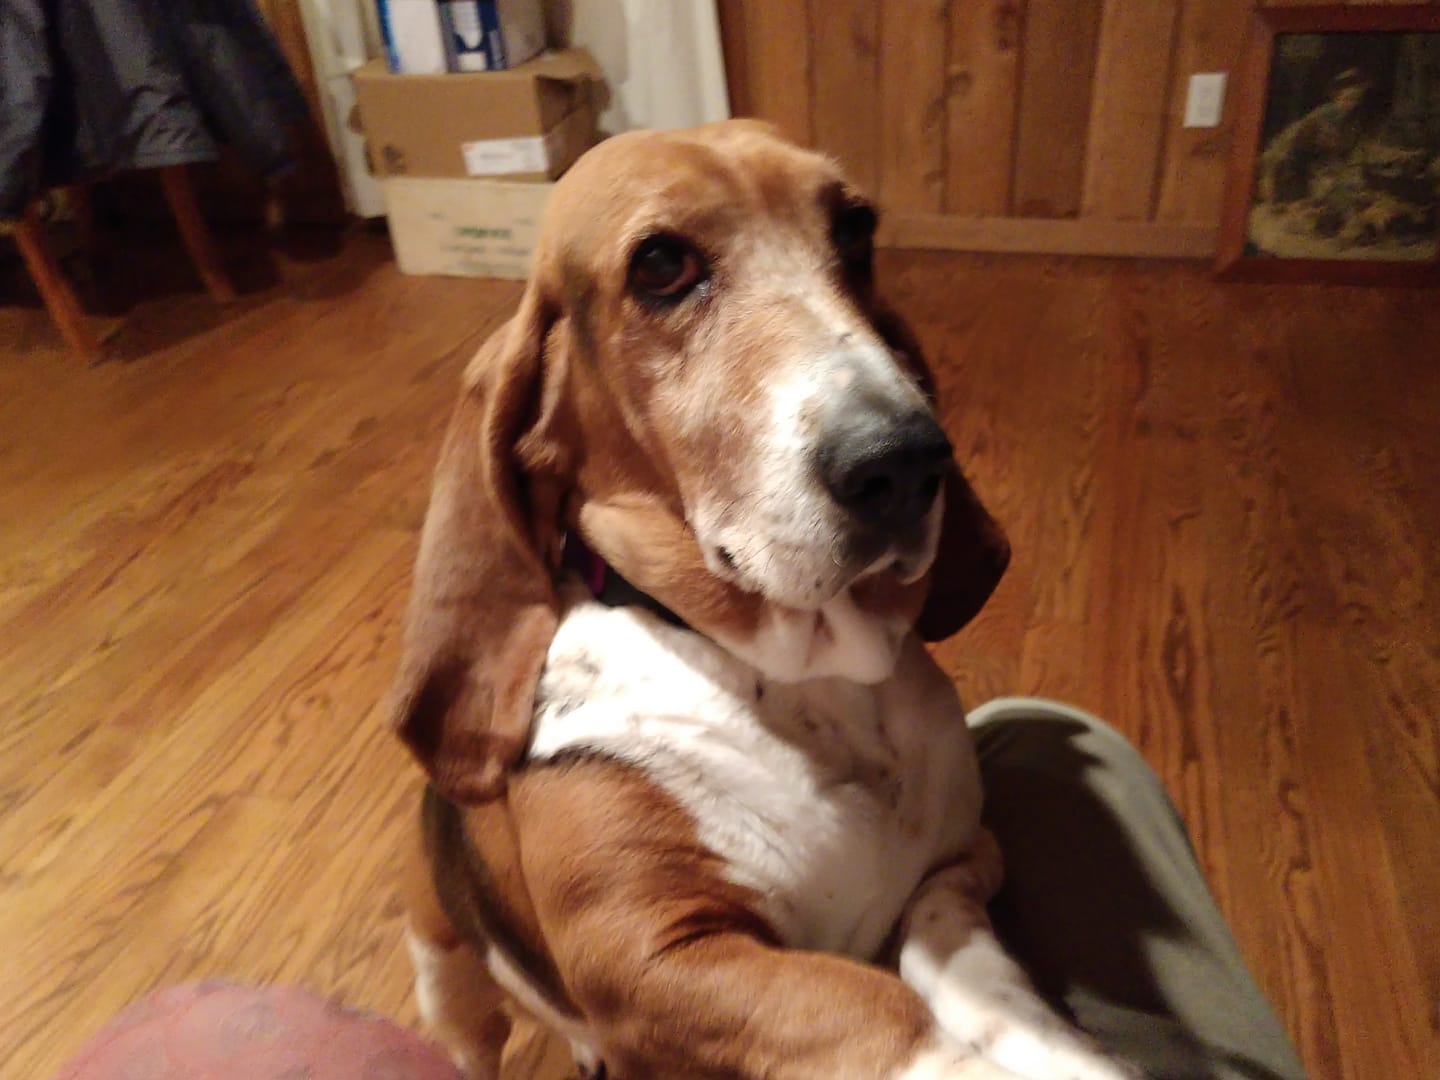 A Basset Hound leaning towards the lap of the person sitting on the couch